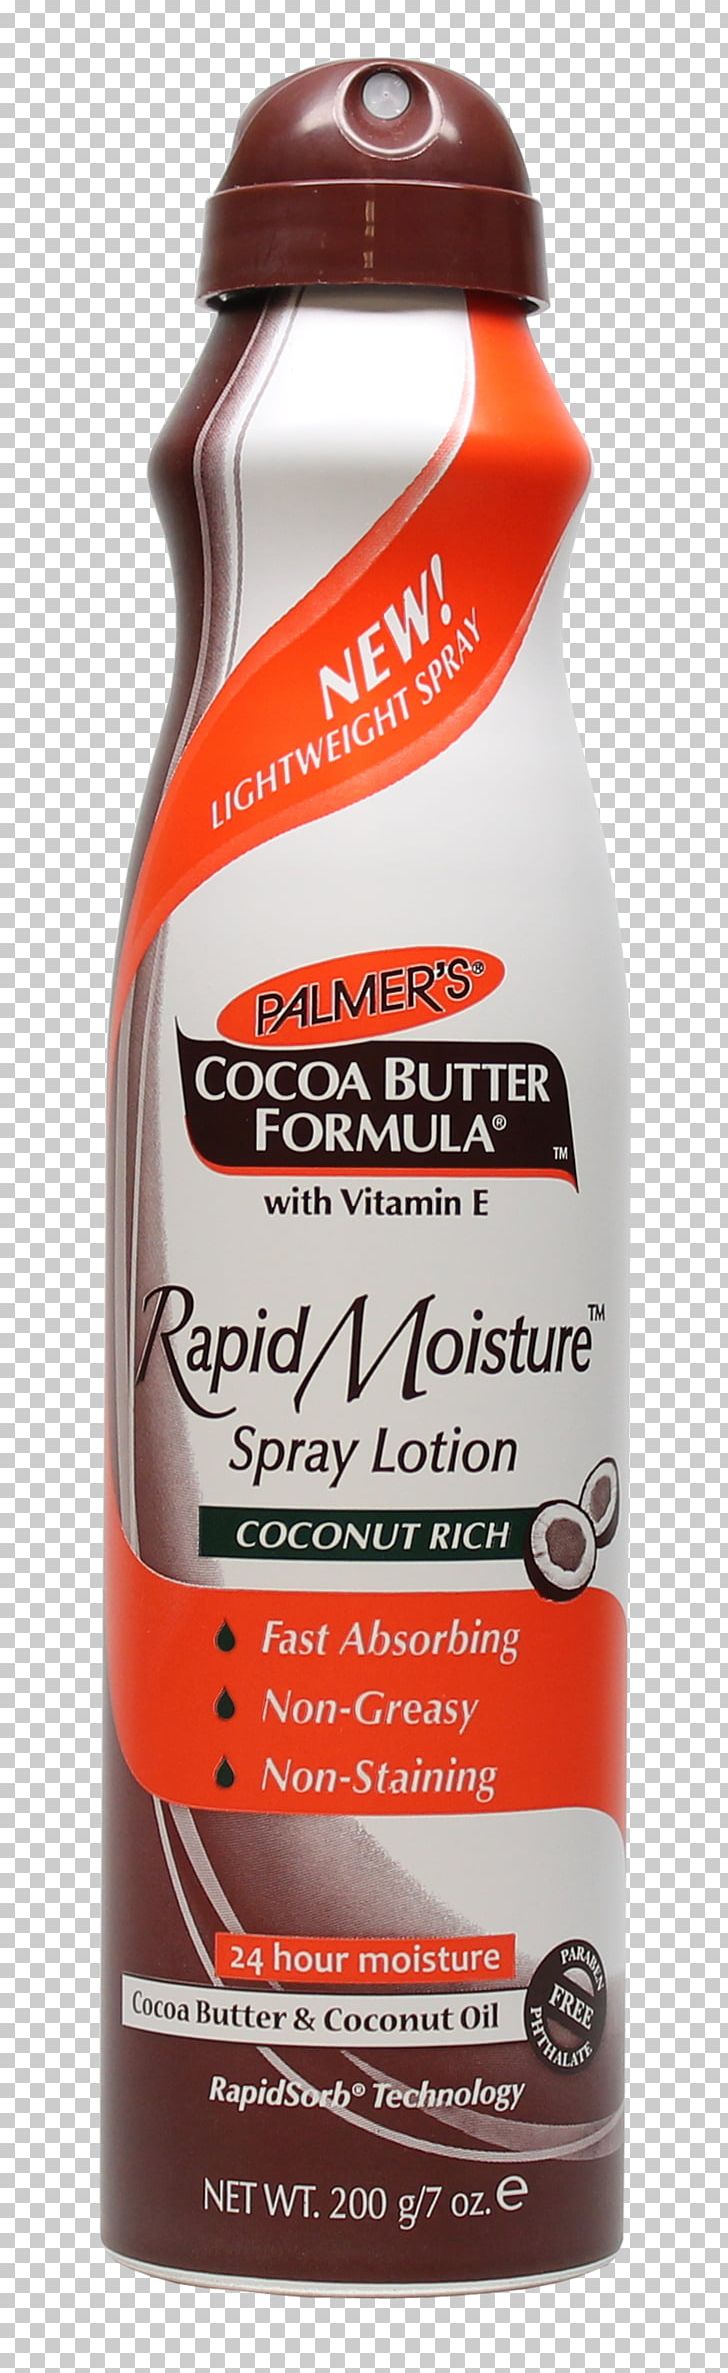 Palmer's Cocoa Butter Formula Cream Soap Product Cacao Tree PNG, Clipart,  Free PNG Download